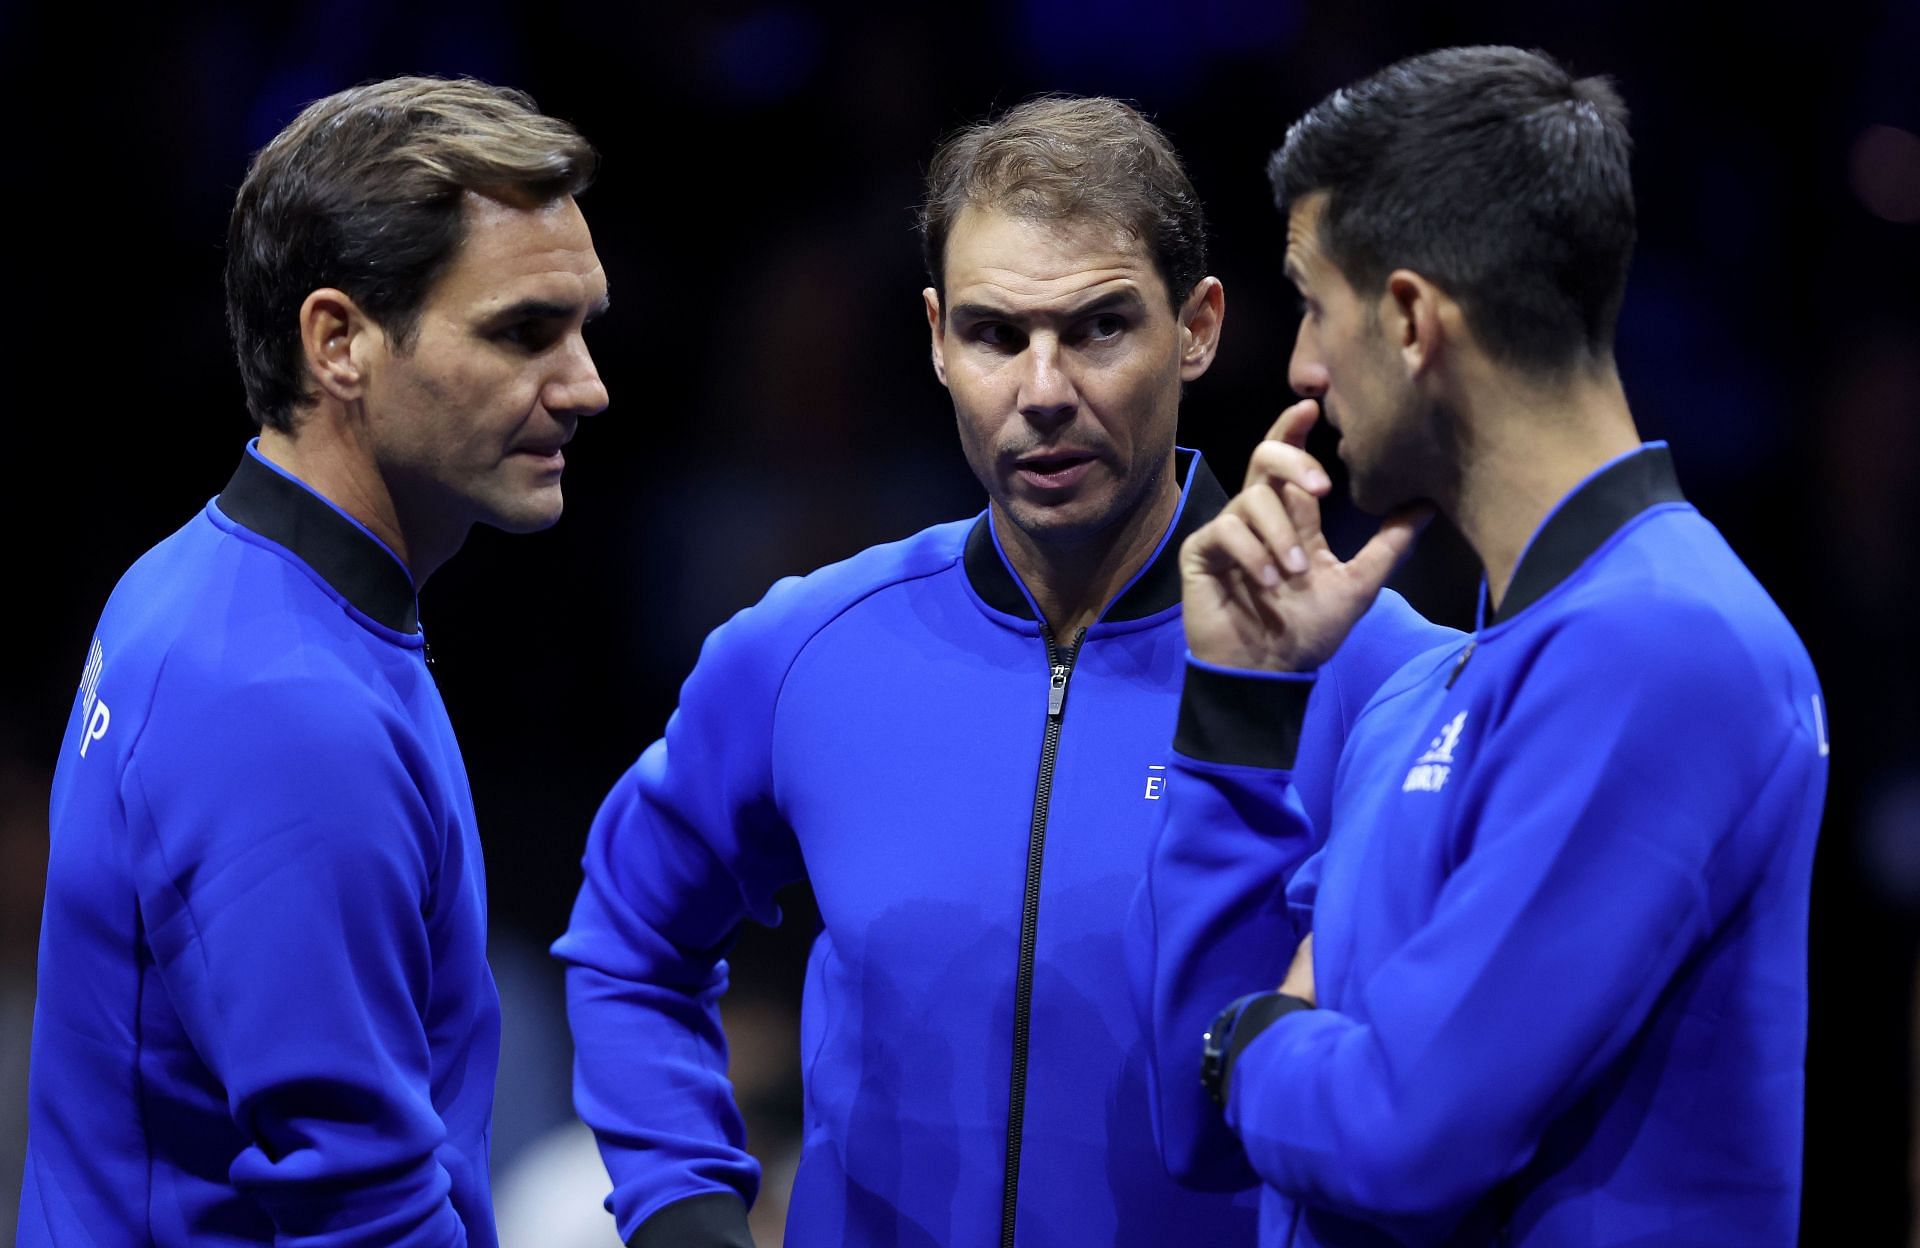 Novak Djokovic, Rafael Nadal and Roger Federer pictured at the Laver Cup 2022.